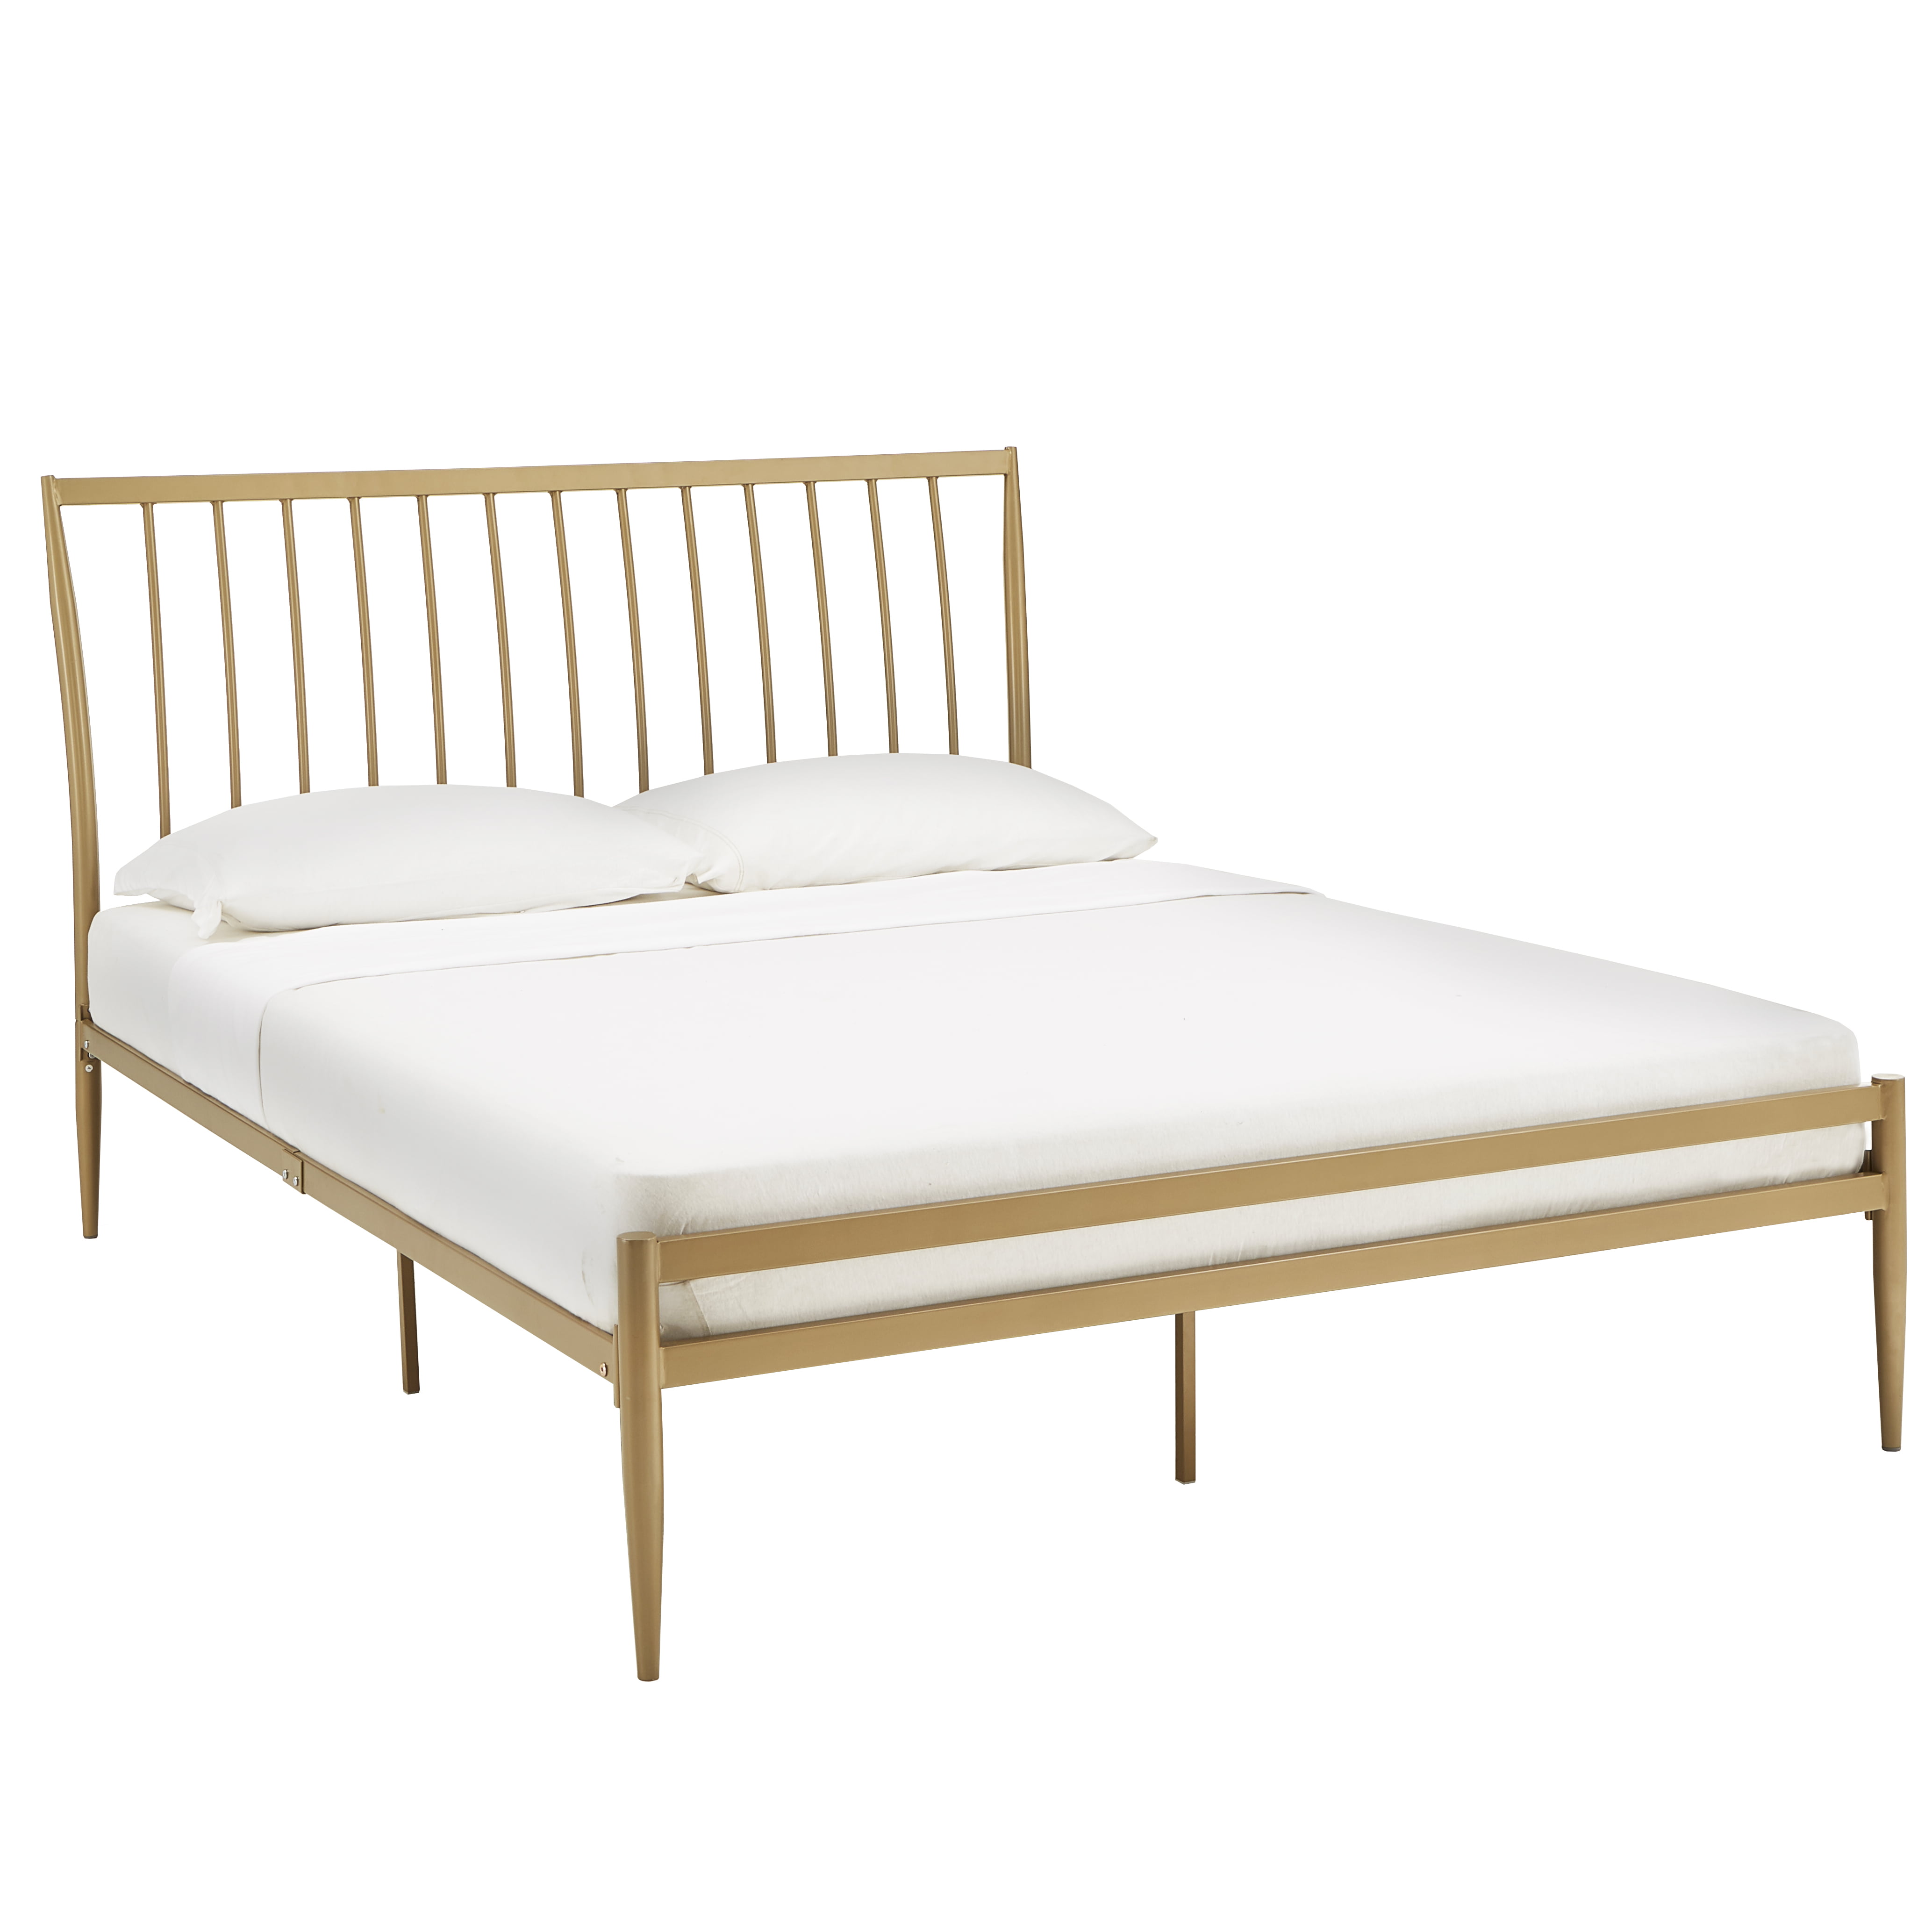 Weston Home Haverhill Gold Finish, Weston Bed Frame